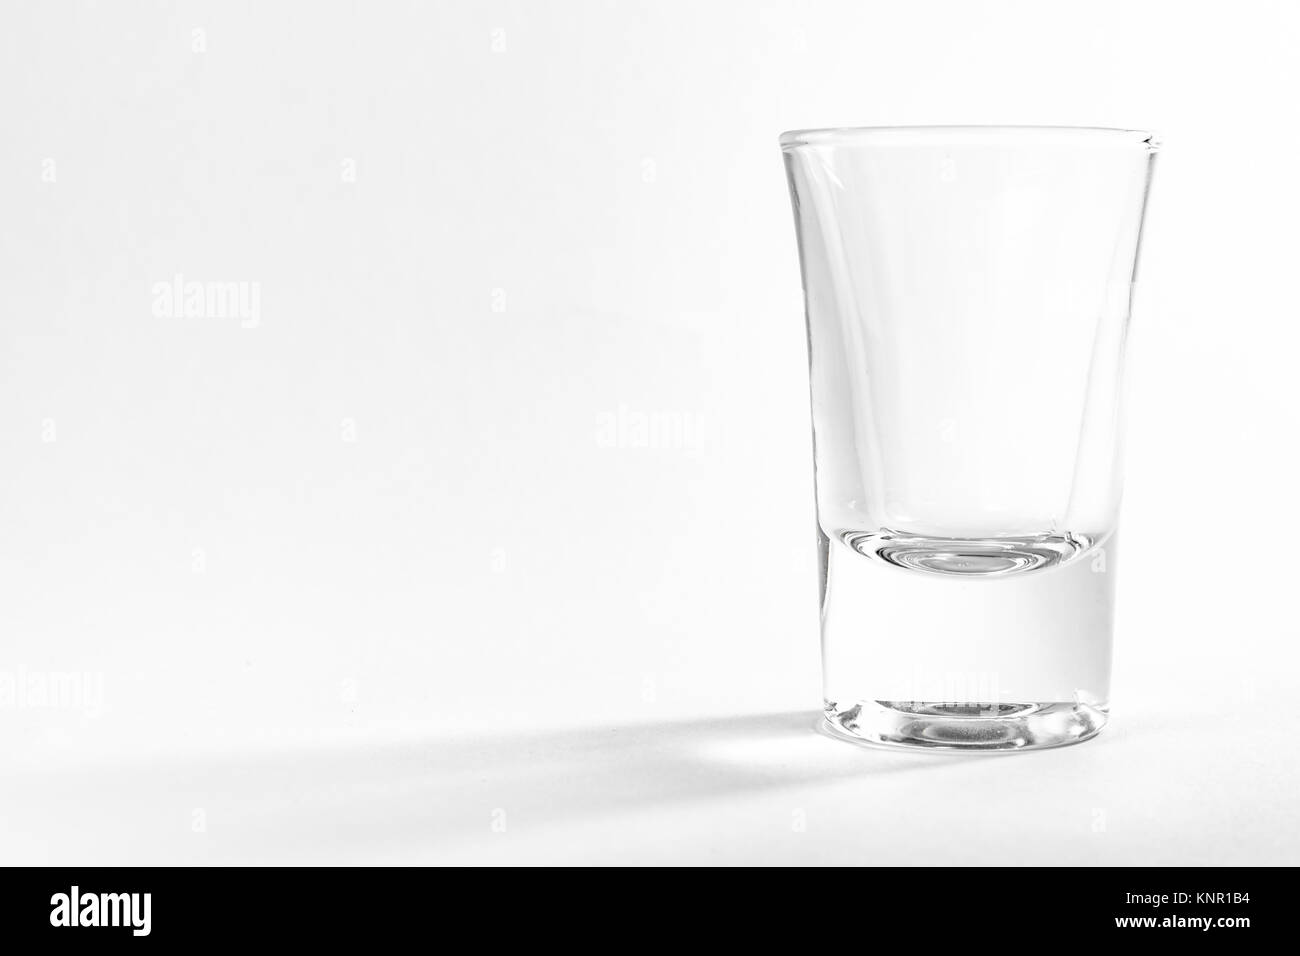 Empty Full Shot Glass Party Drinking Alcohol Beer Whiskey Clear Bourbon White Background Isolated Object Single Composition Stock Photo